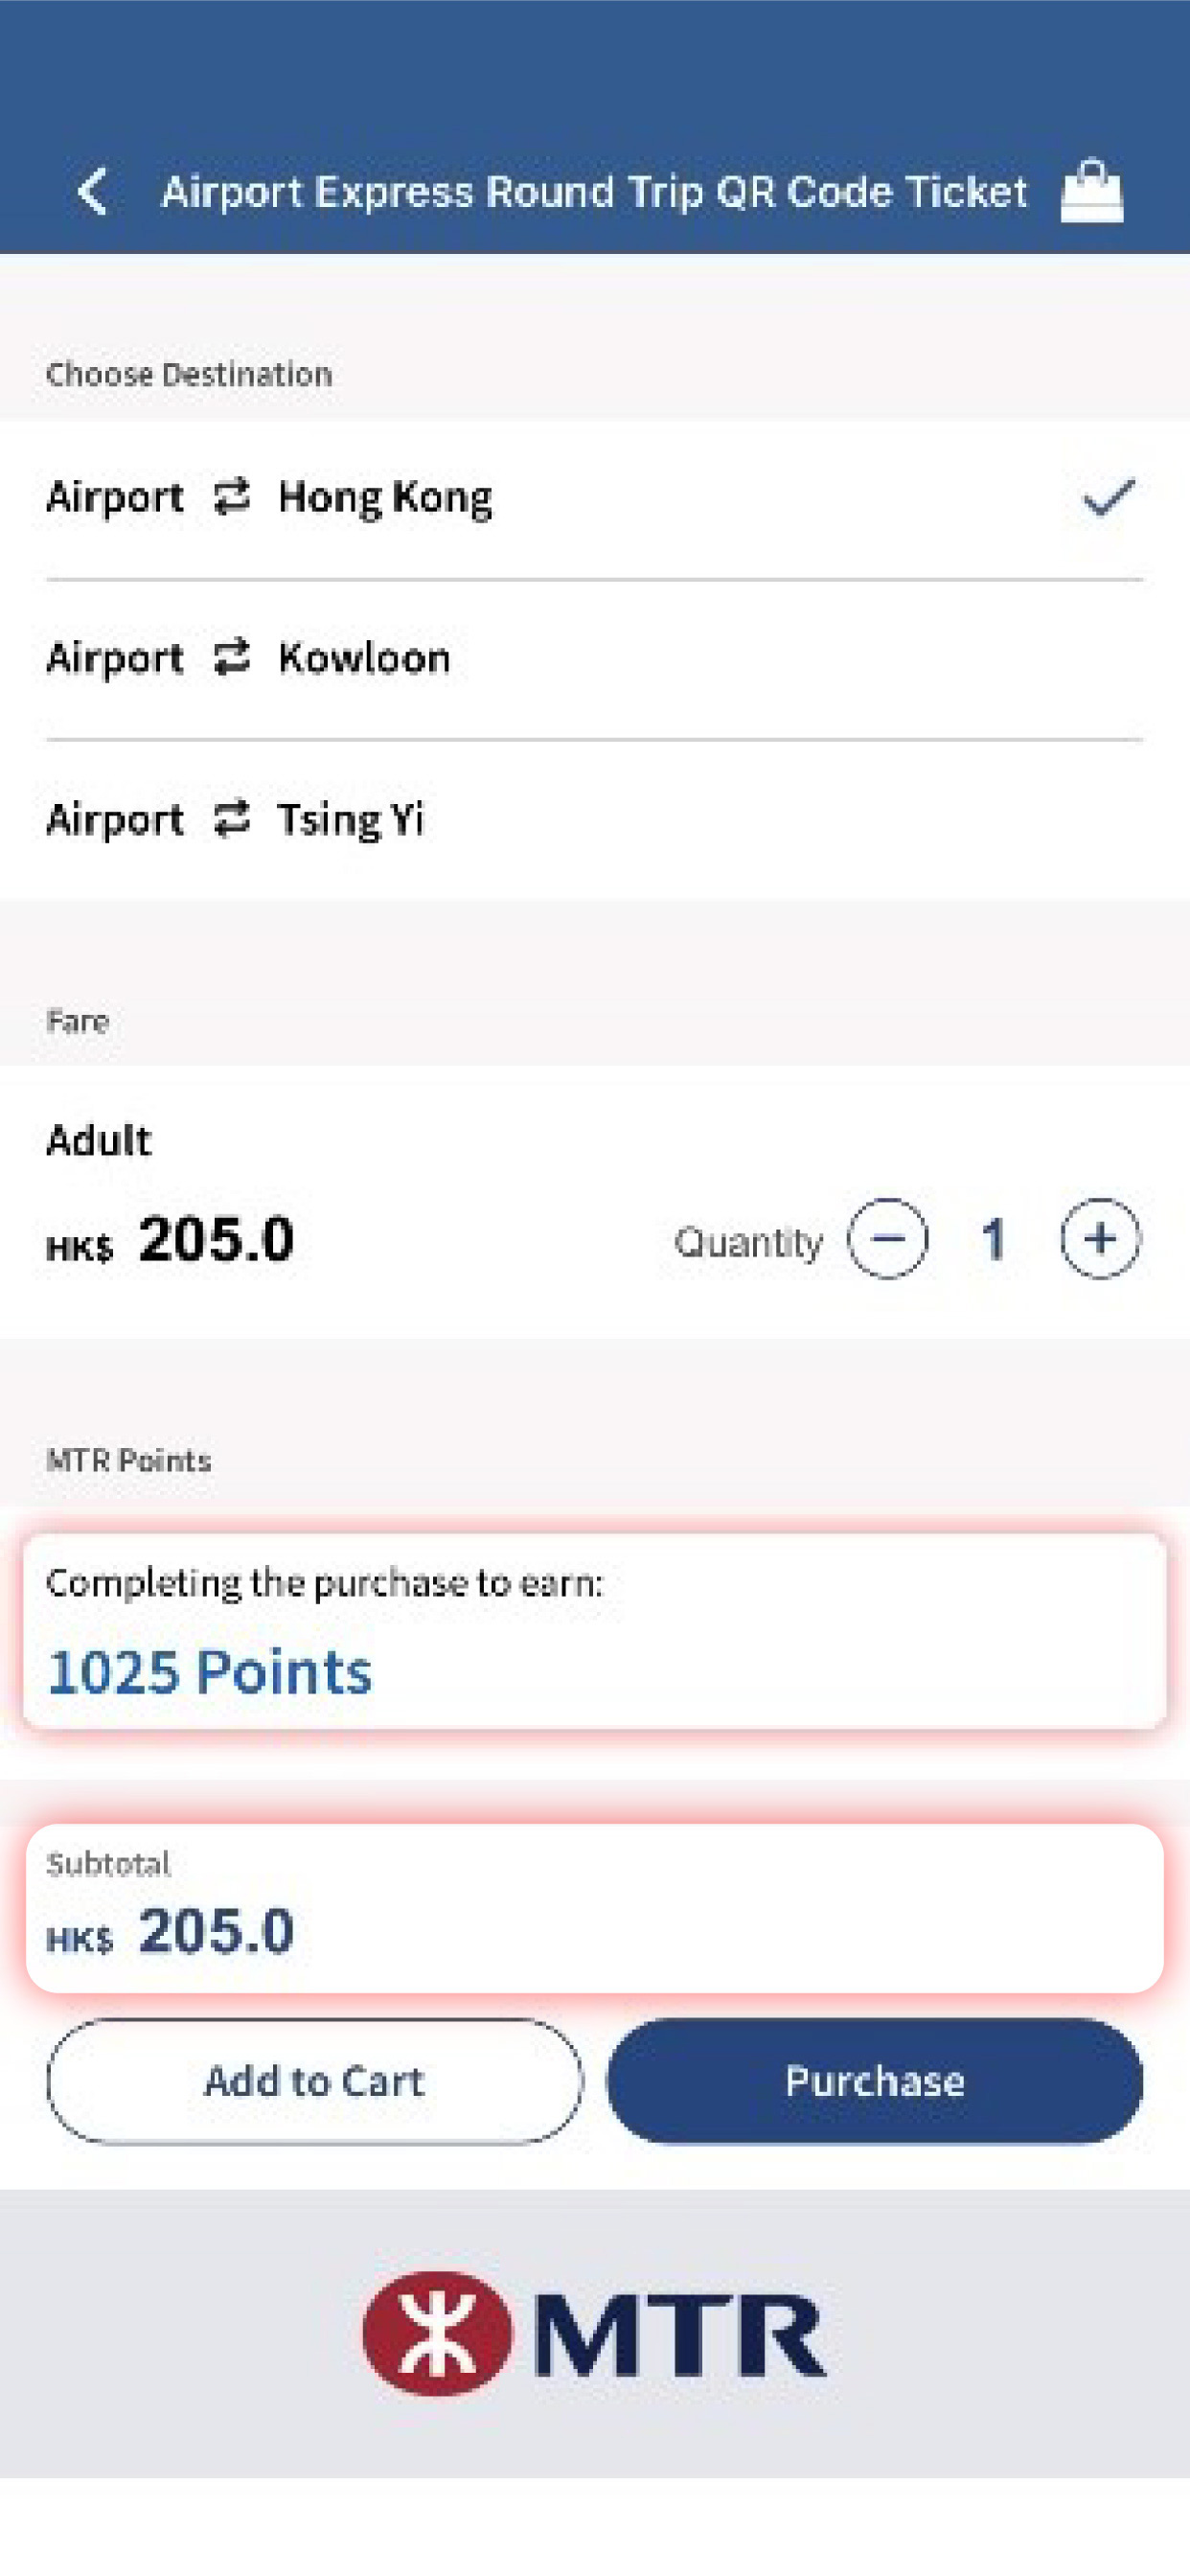 Select the destination and the quantity required, the ticket information including MTR points earned and ticket price subtotal will be displayed